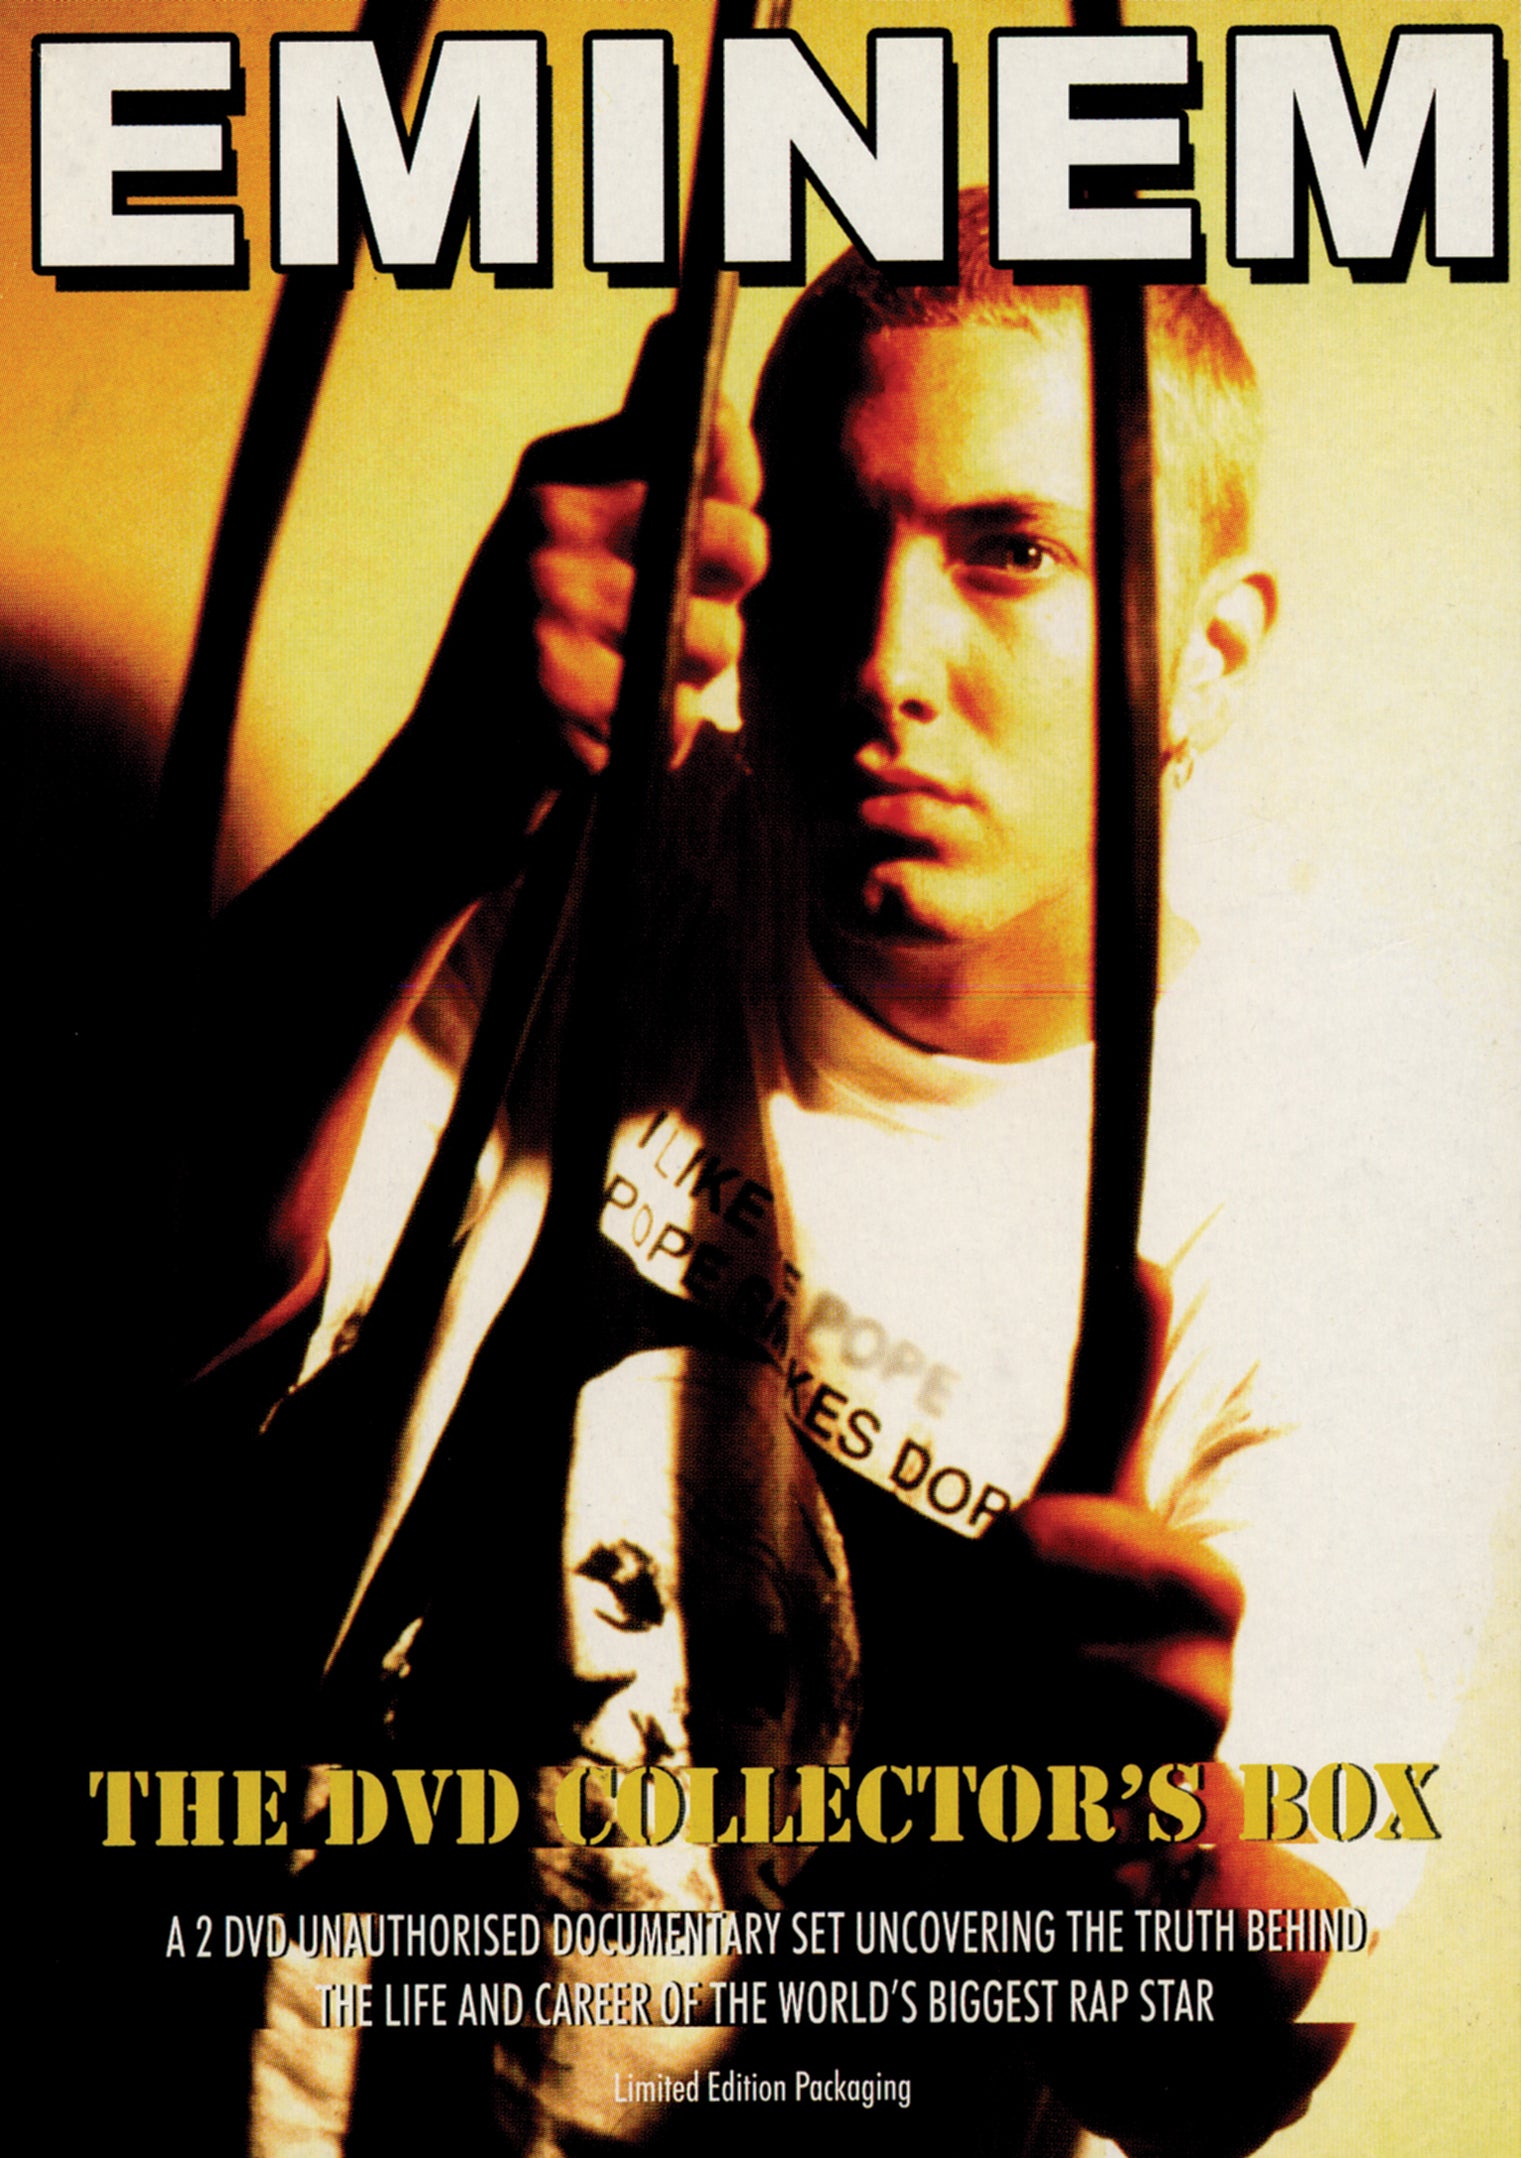 Eminem - The DVD Collector's Box Unauthorized (DVD)